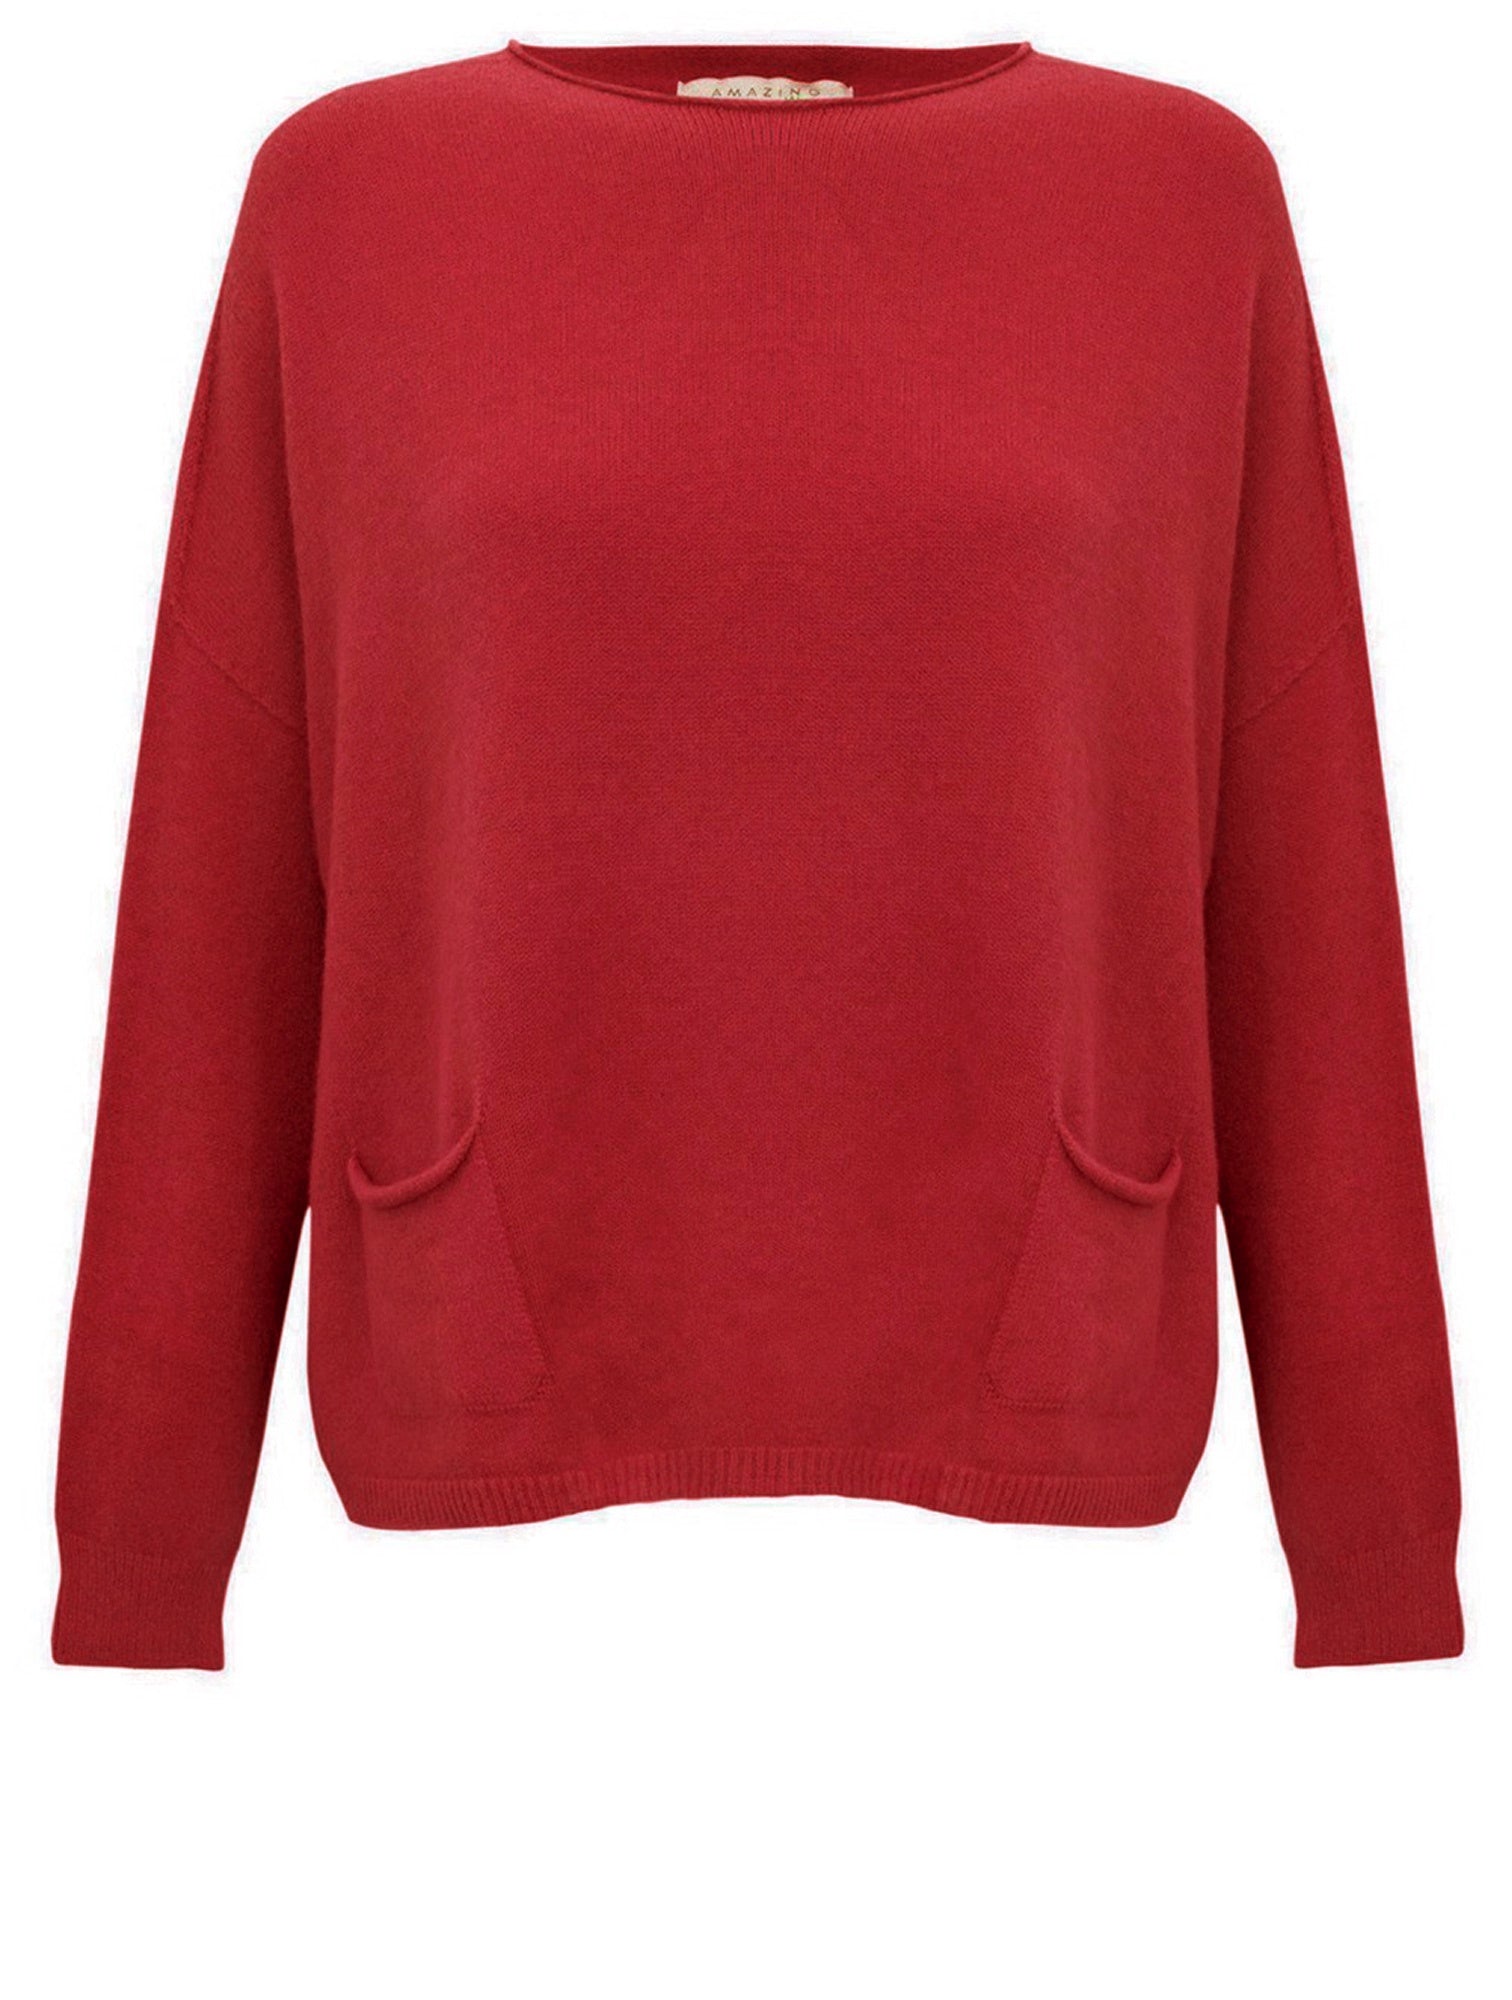 Amazing Woman Jodie Fine Knit Jumper Berry Red.